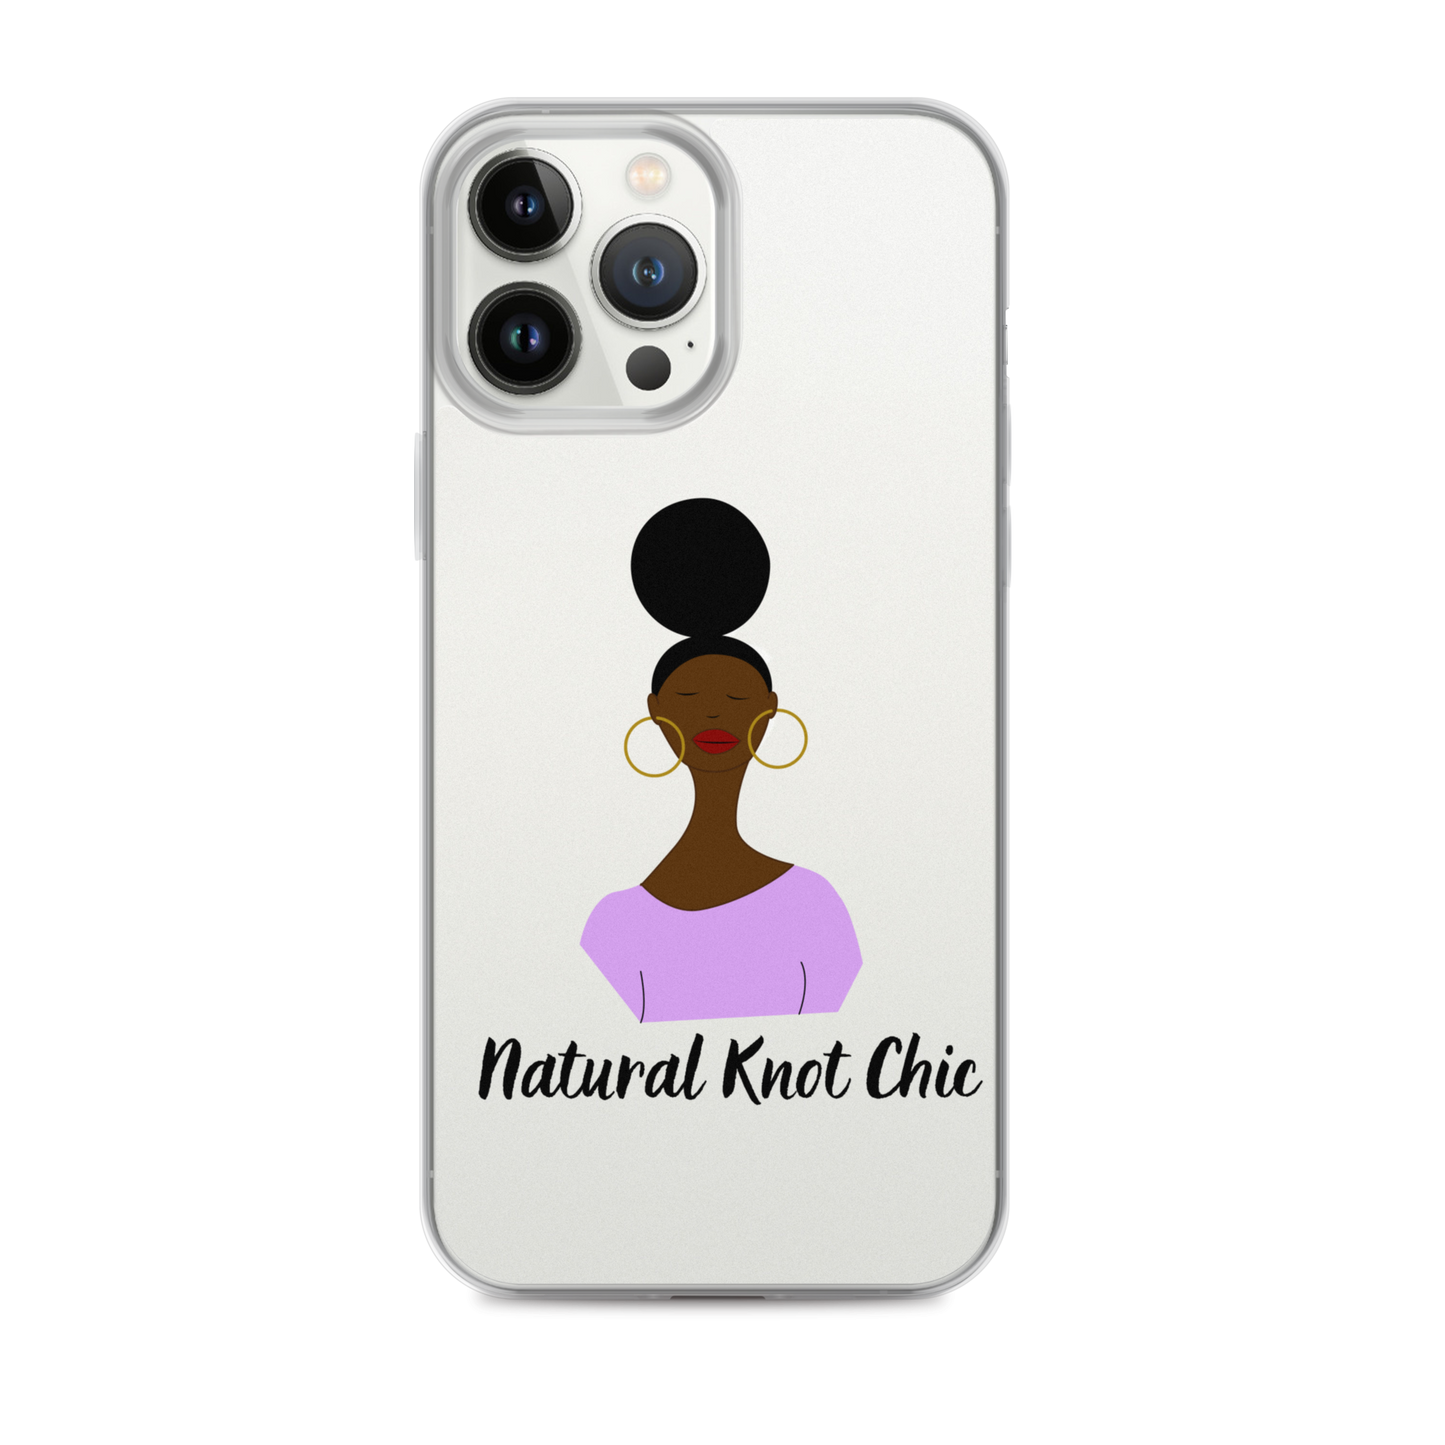 Natural Knot Chic iPhone Case